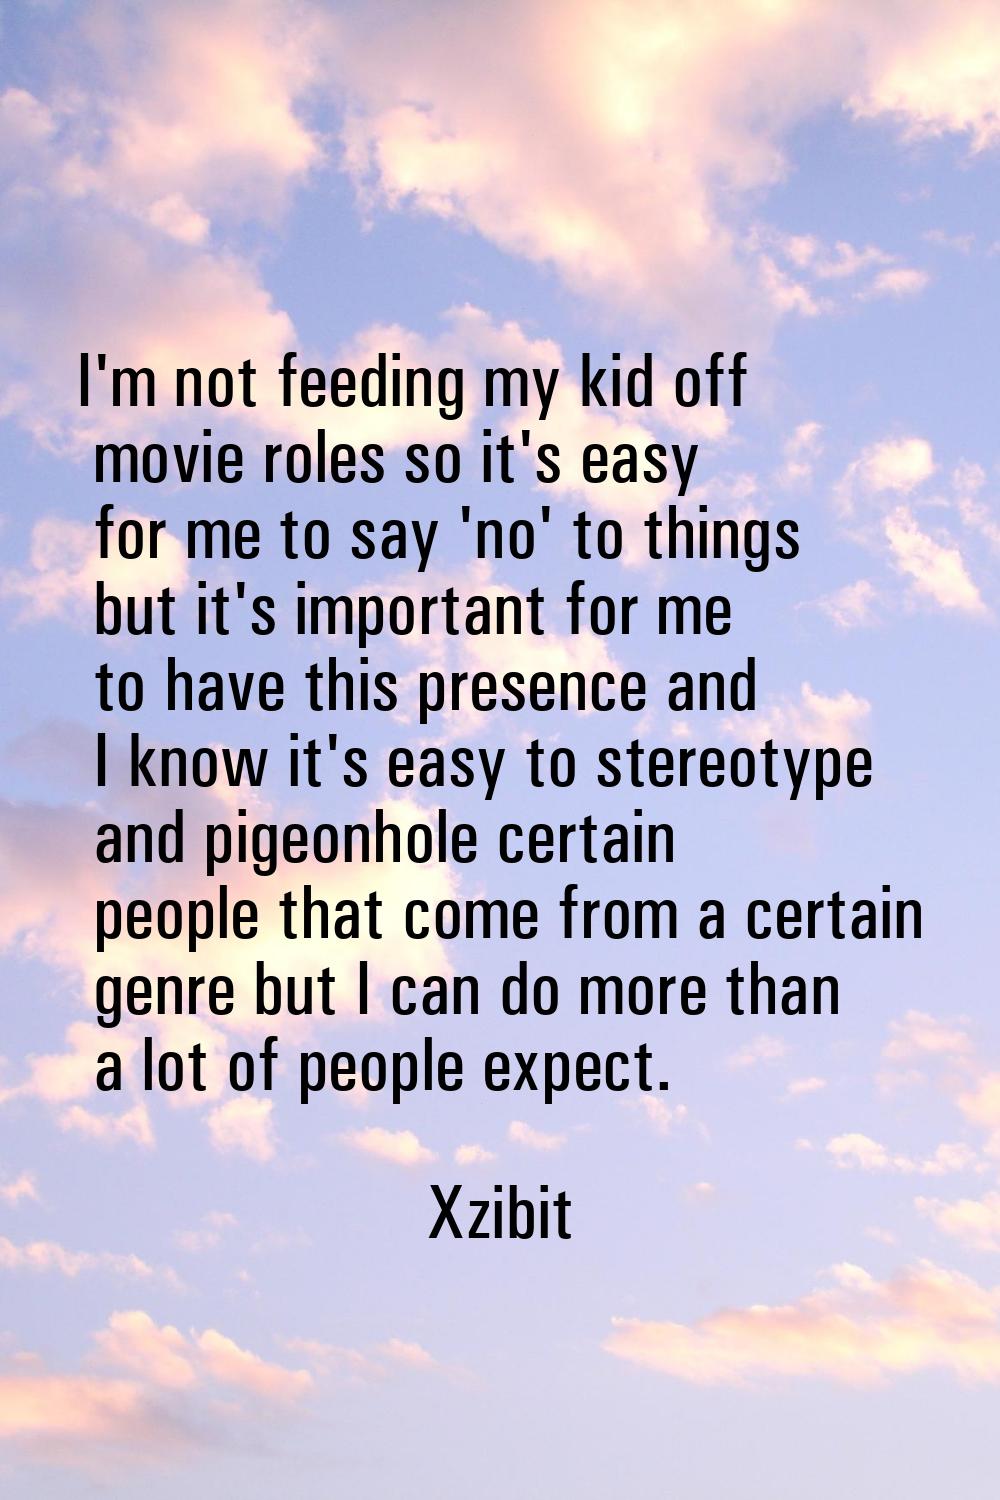 I'm not feeding my kid off movie roles so it's easy for me to say 'no' to things but it's important